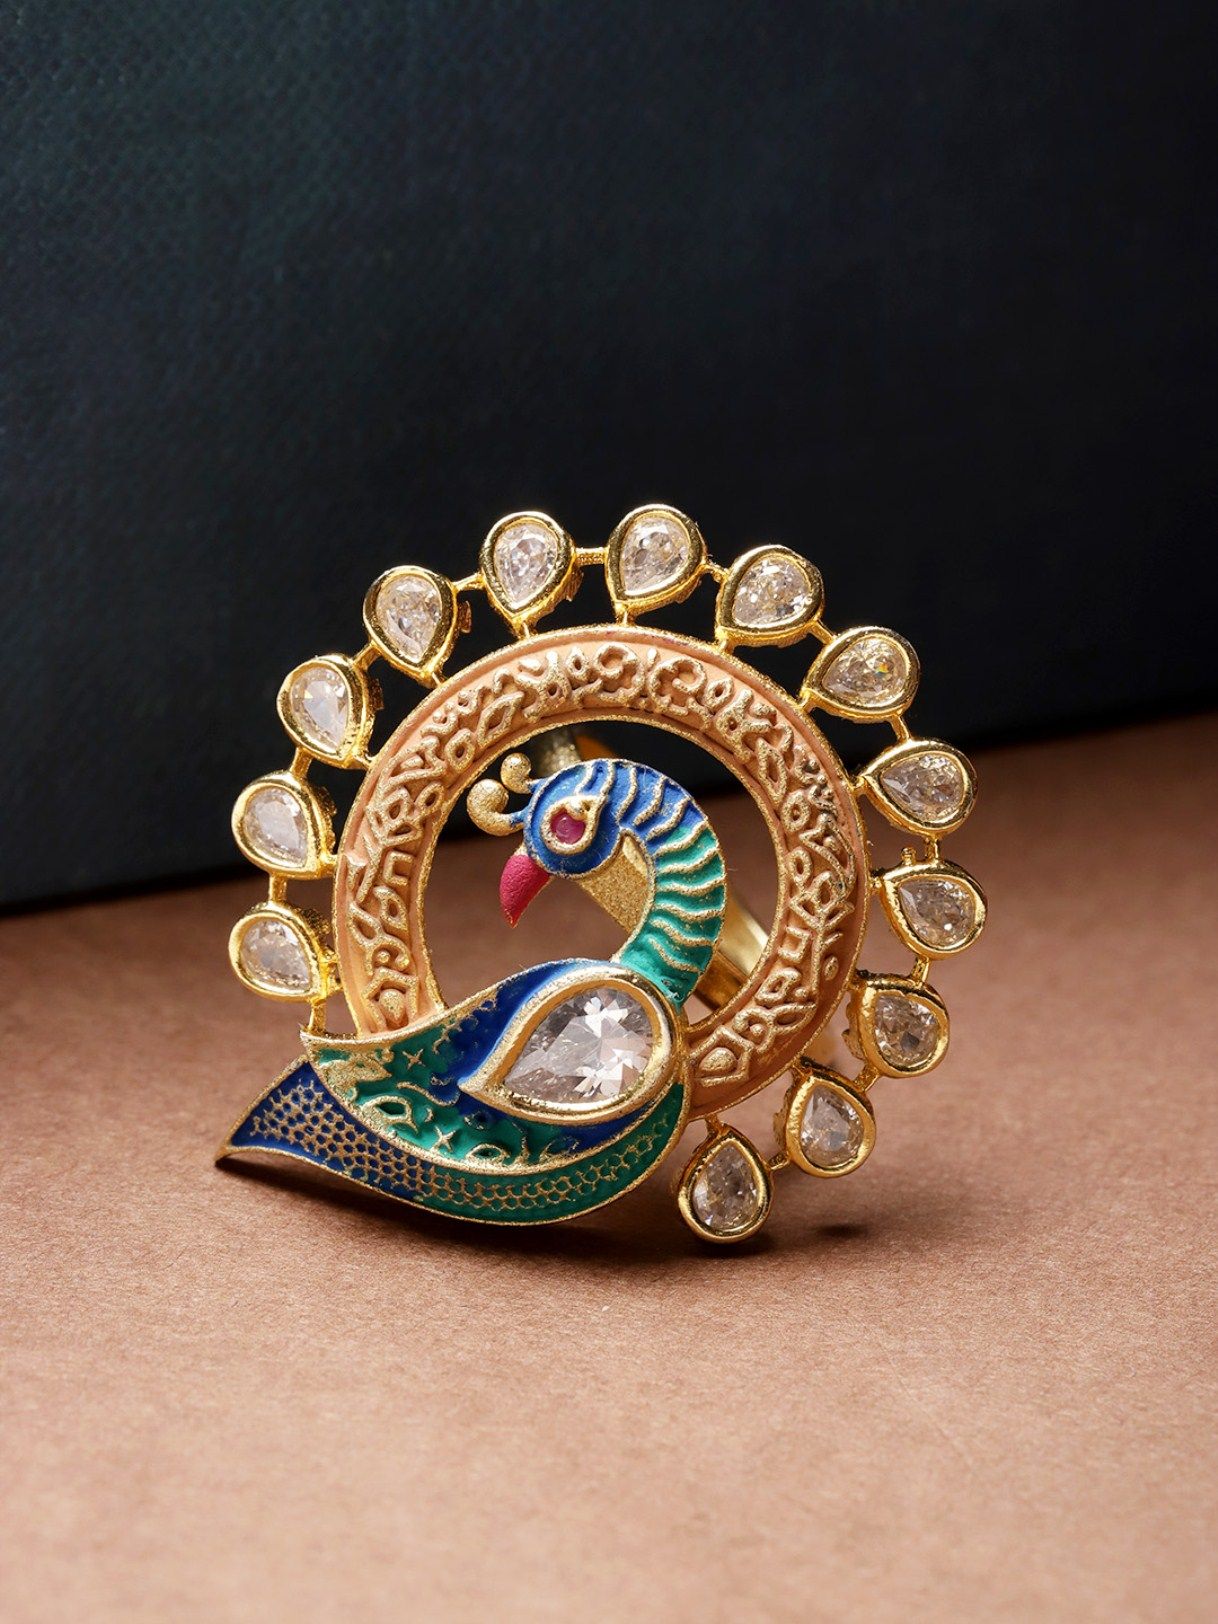 Buy quality 916 22K Gold Casting Peacock Ring in Ahmedabad